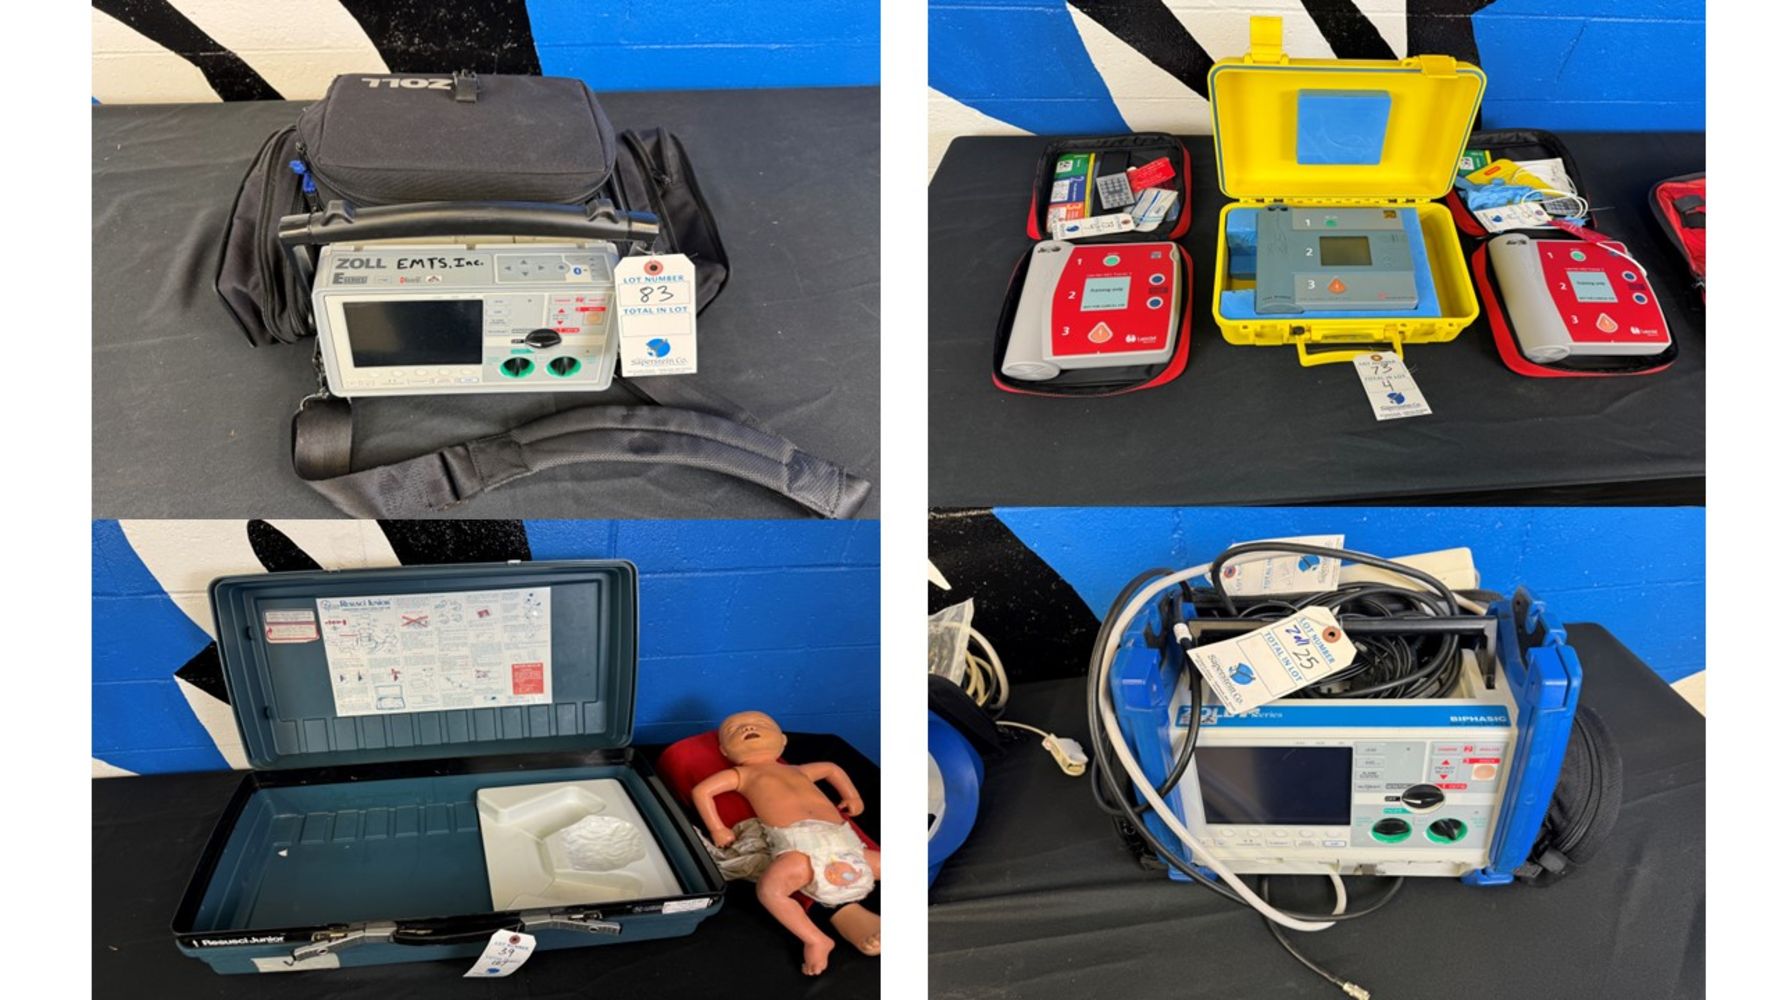 EMERGENCY MEDICAL TRAINING COMPANY - CRISIS MANNEQUINS - (14) DEFIBRILLATORS & TRAINERS - AIRWAY MGMT. TRAINERS - INTUBATION TEACHING MODELS -